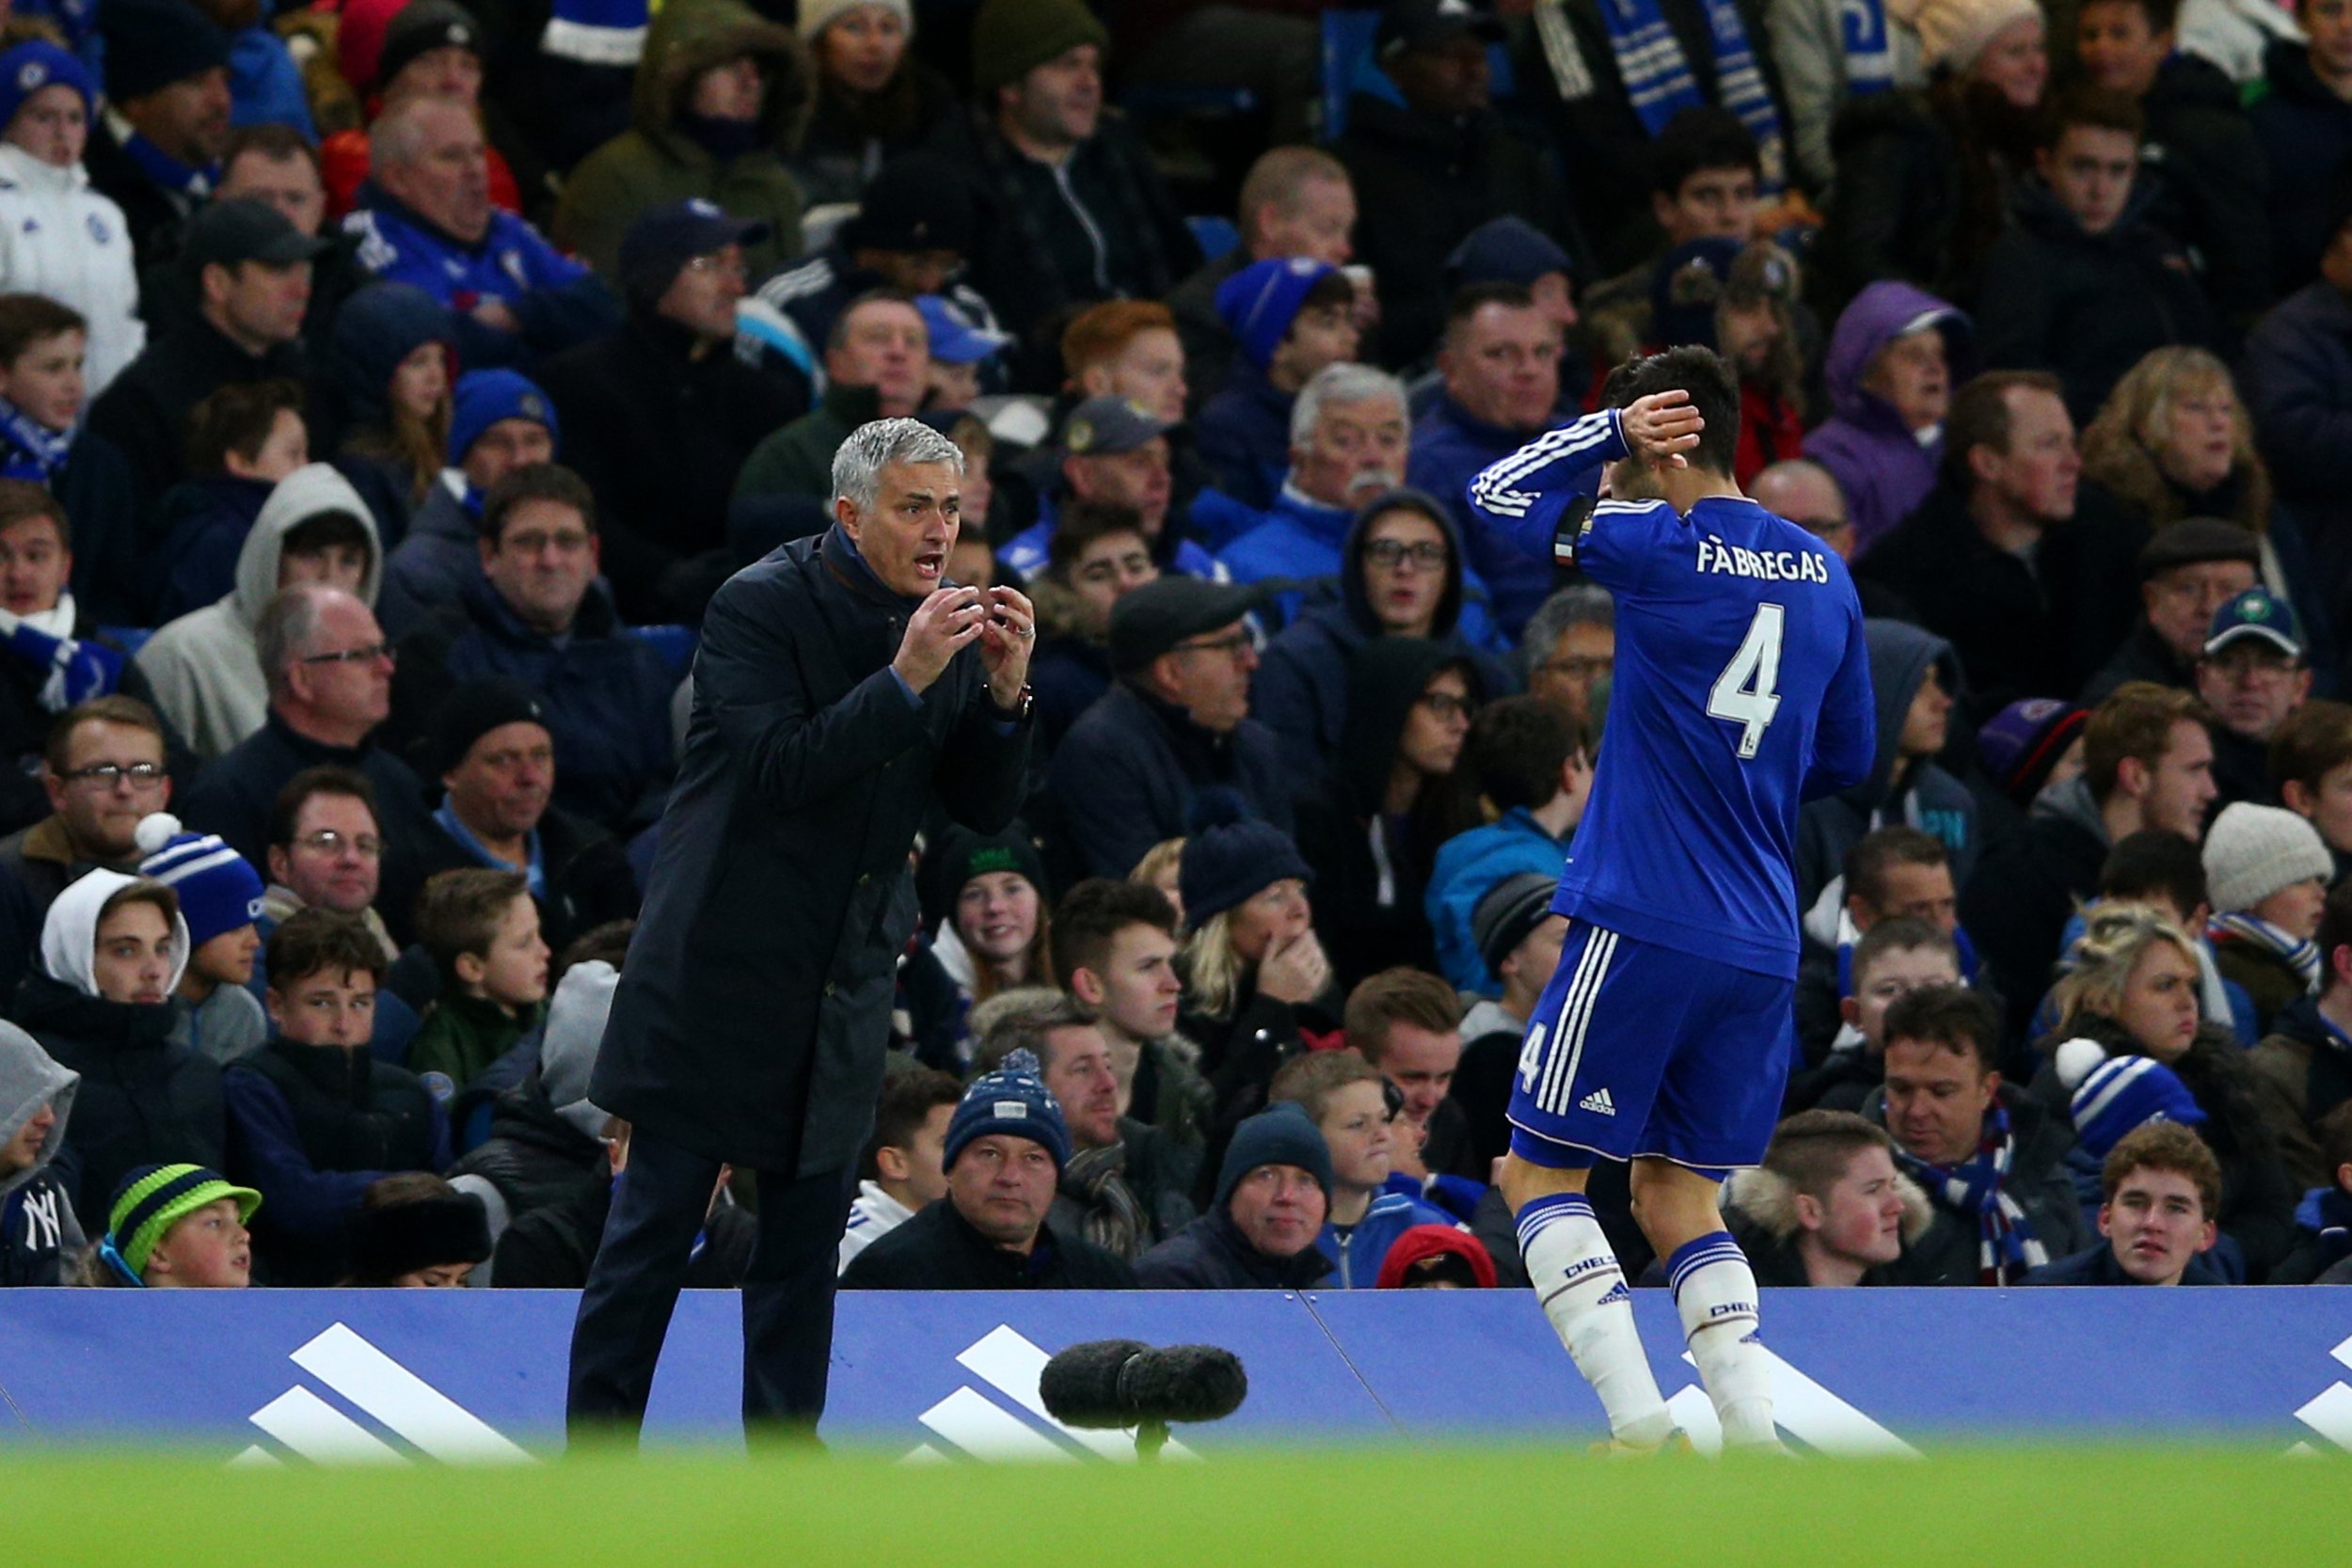 Jose Mourinho 'let down' by Chelsea players